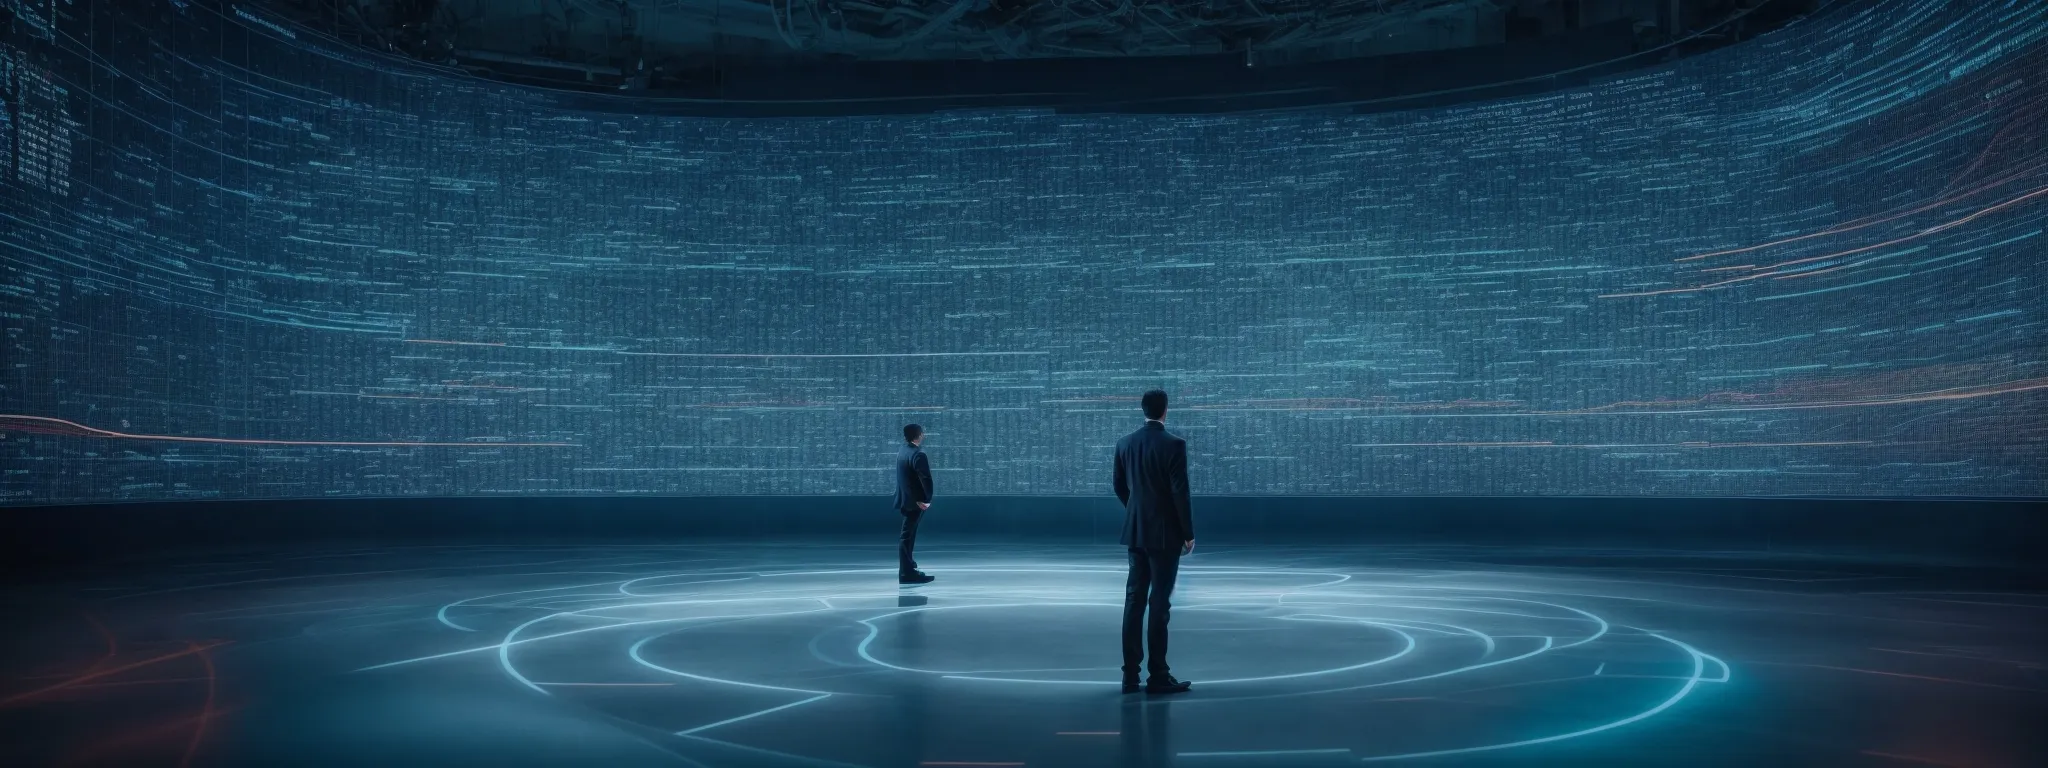 a person stands before a massive, futuristic data visualization screen, symbolizing the analysis of seo trends and technological innovations.